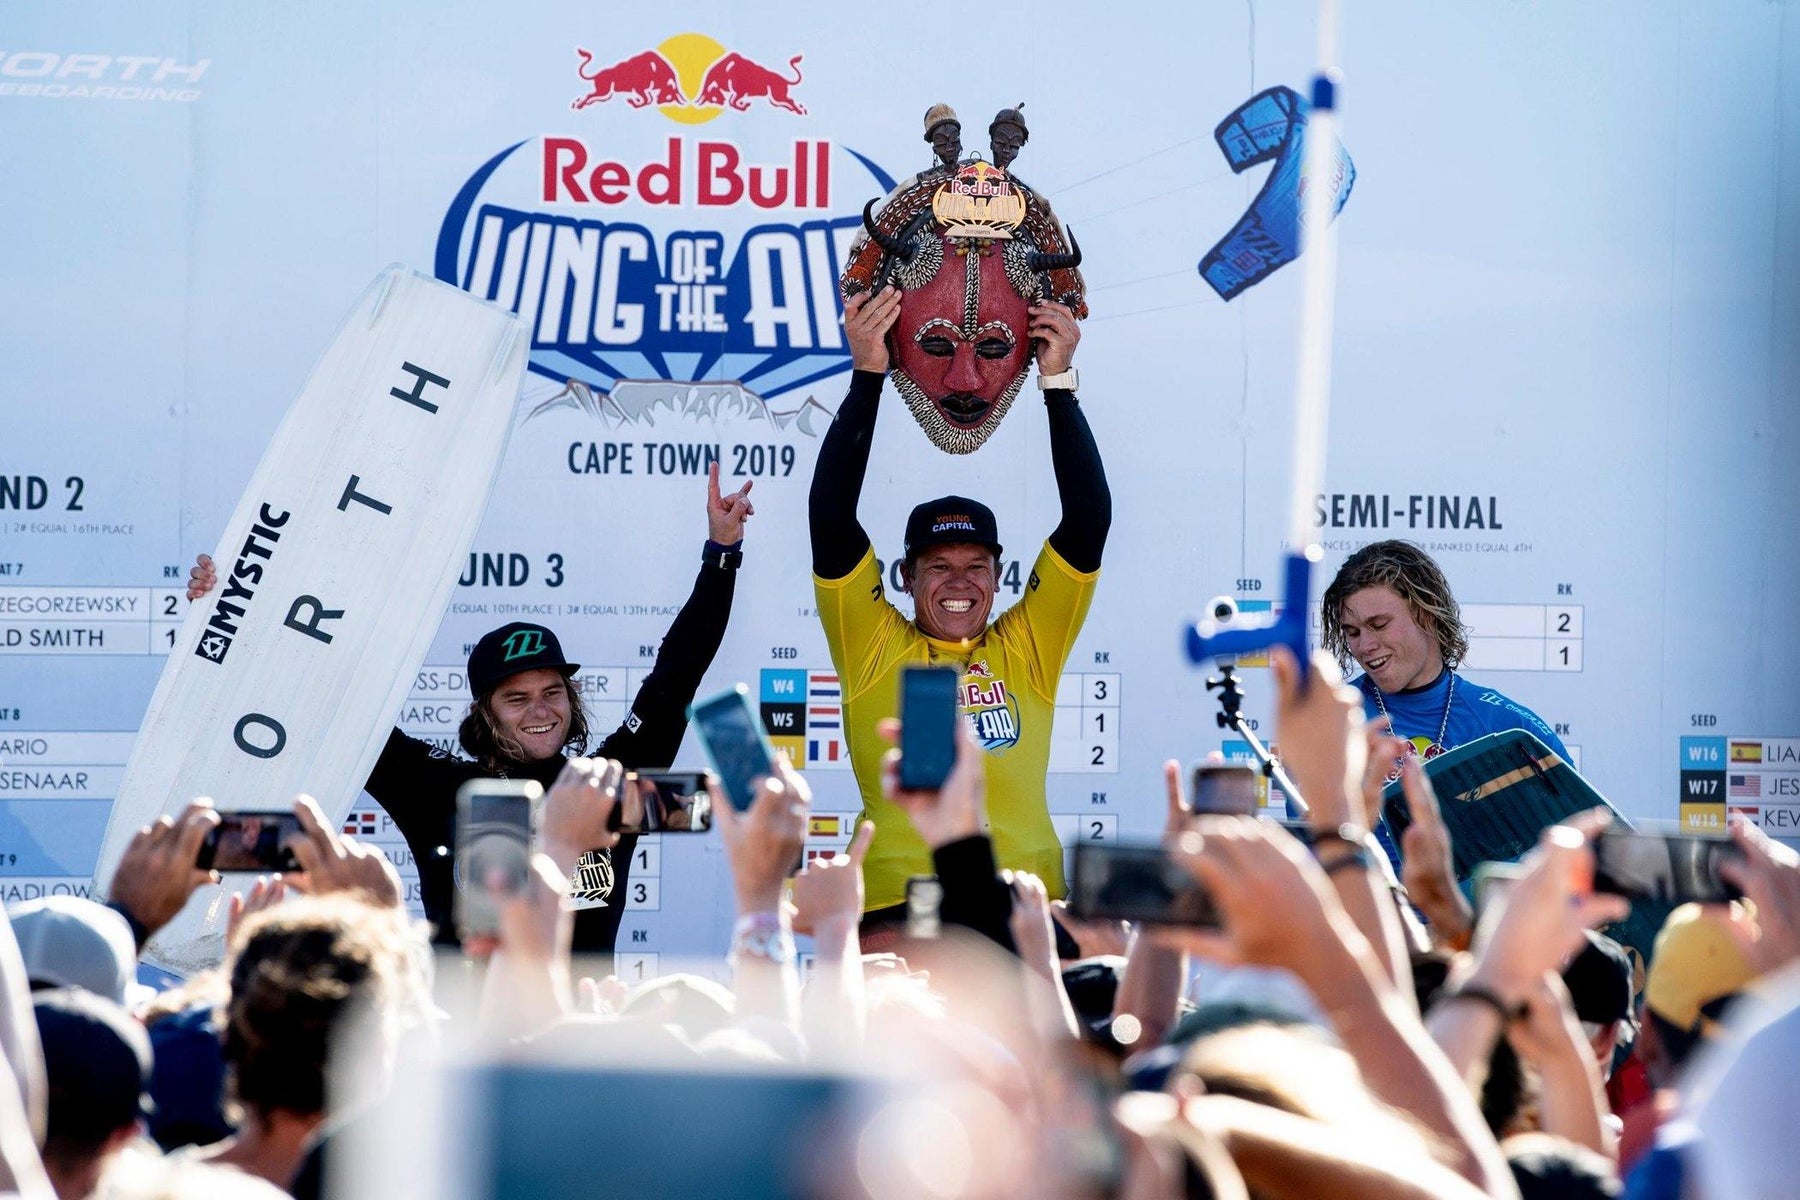 Red Bull King of Air 2019 Results - Elite Watersports